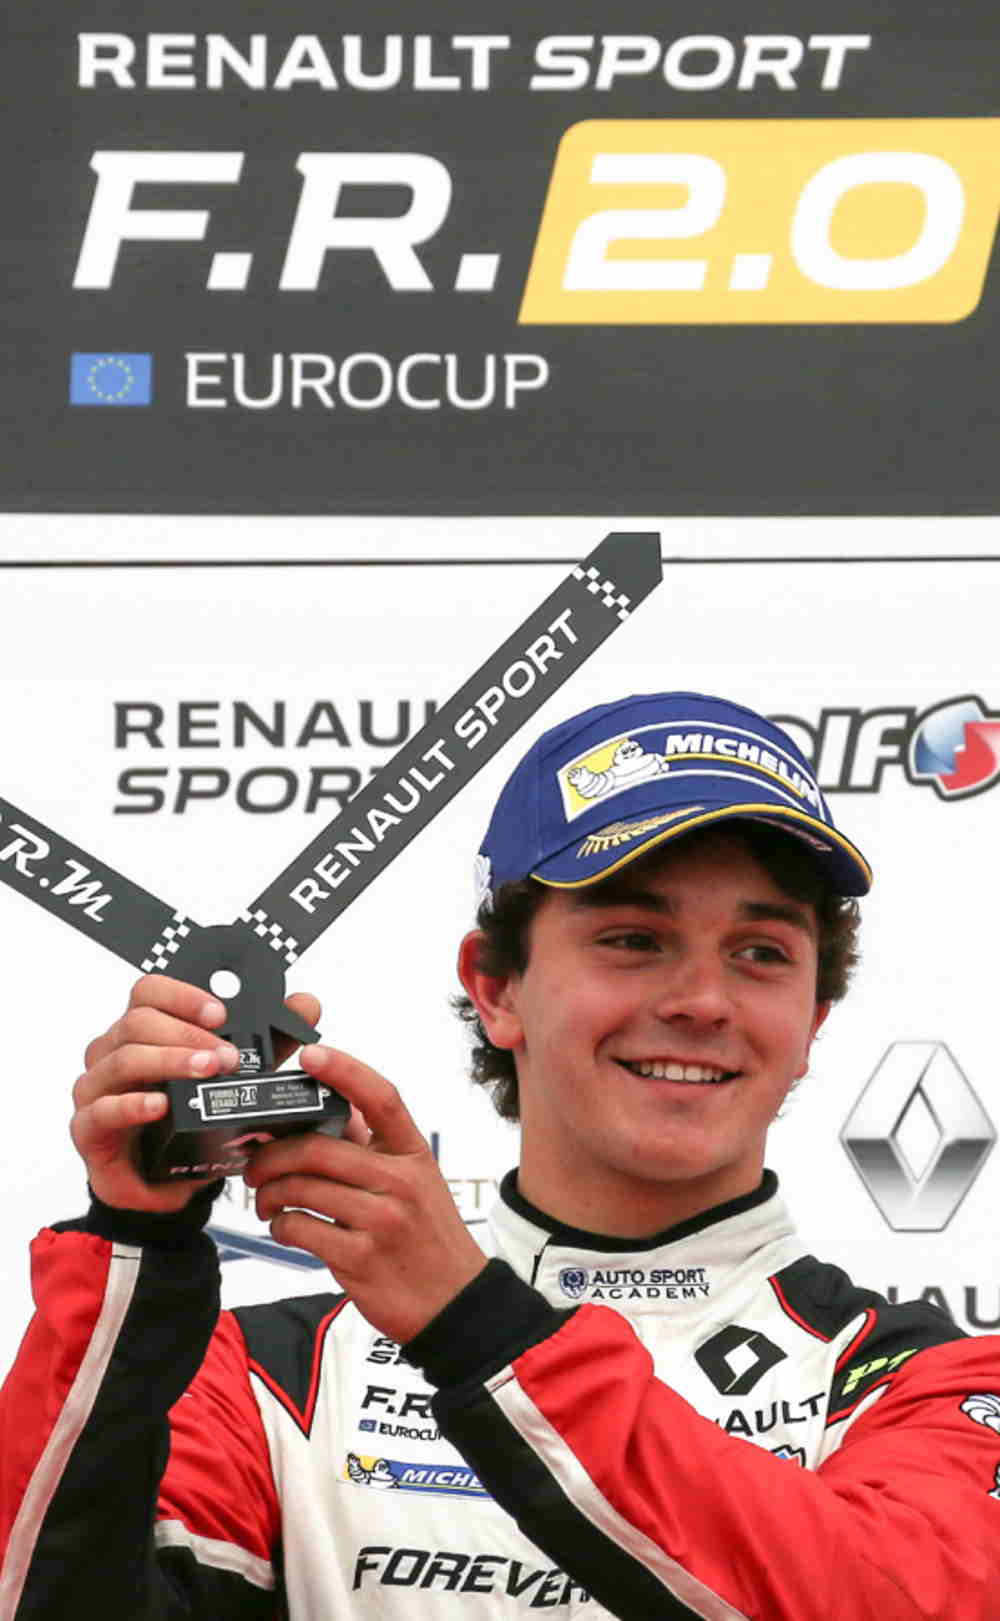 A podium and an especially good performance in curtain raiser for Dorian Boccolacci on the podium